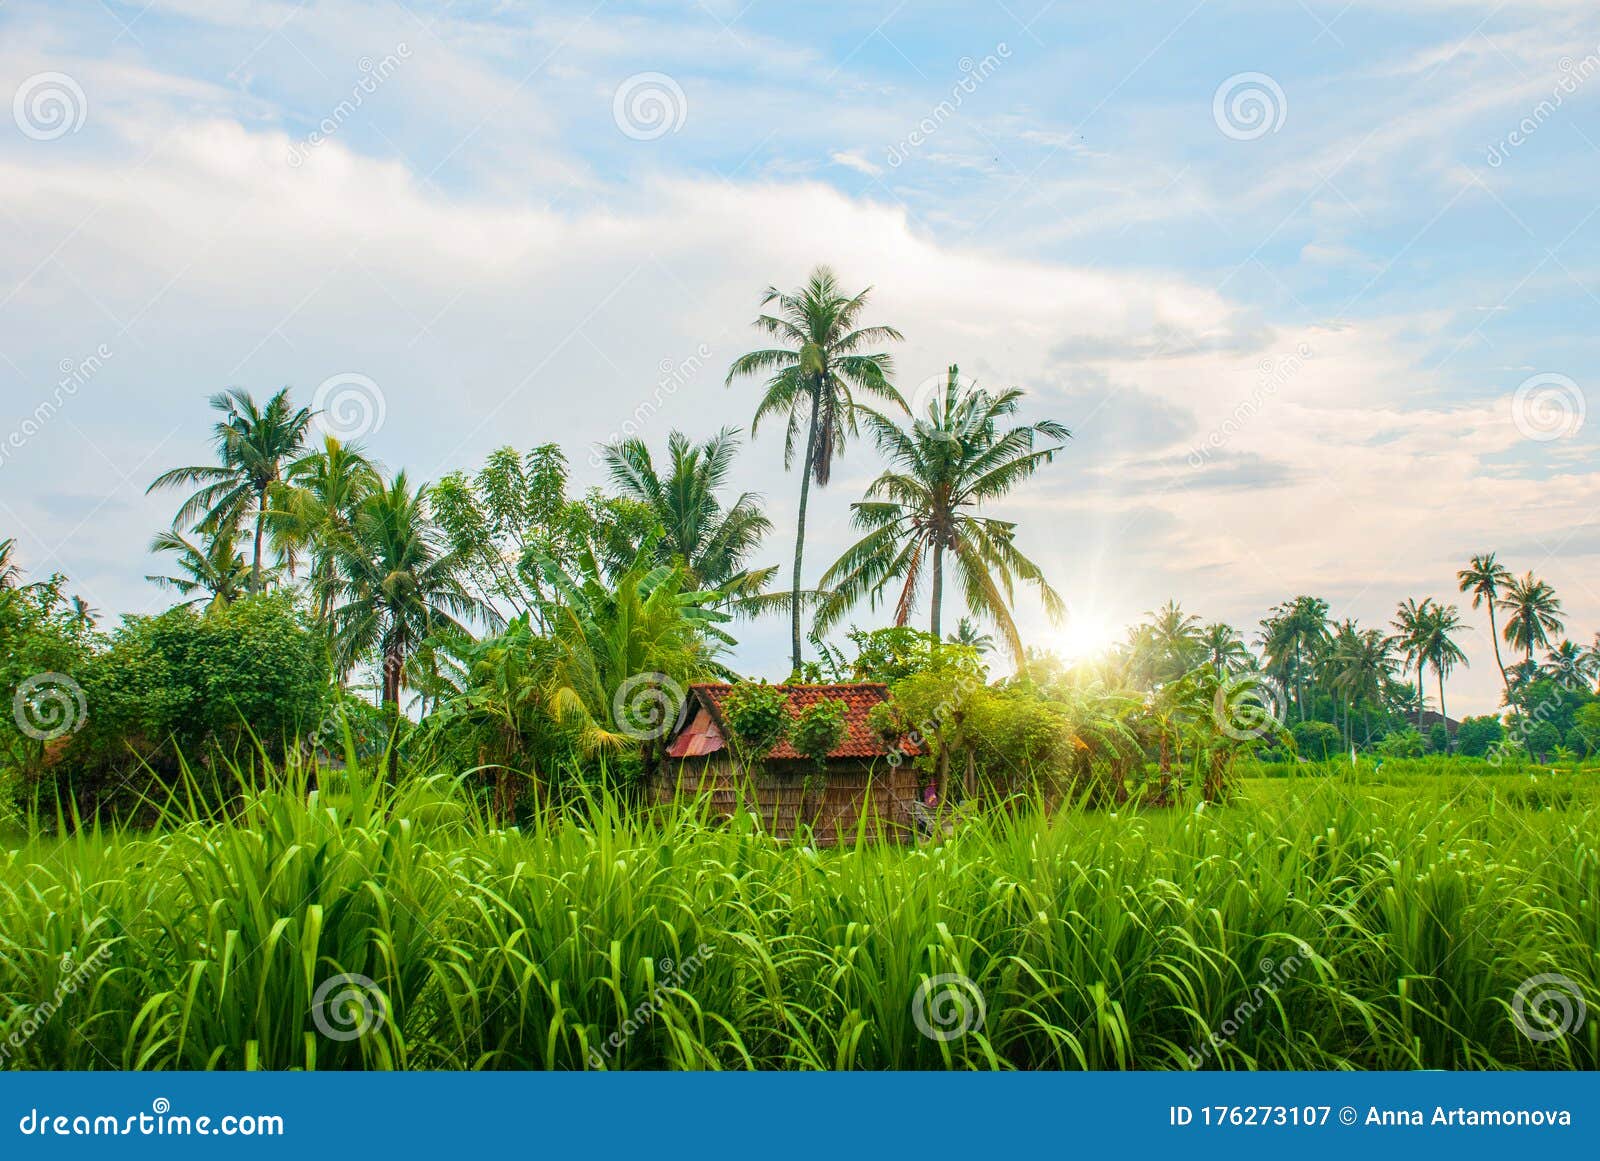 beautiful landscape with fields and trees in the city of amed in bali